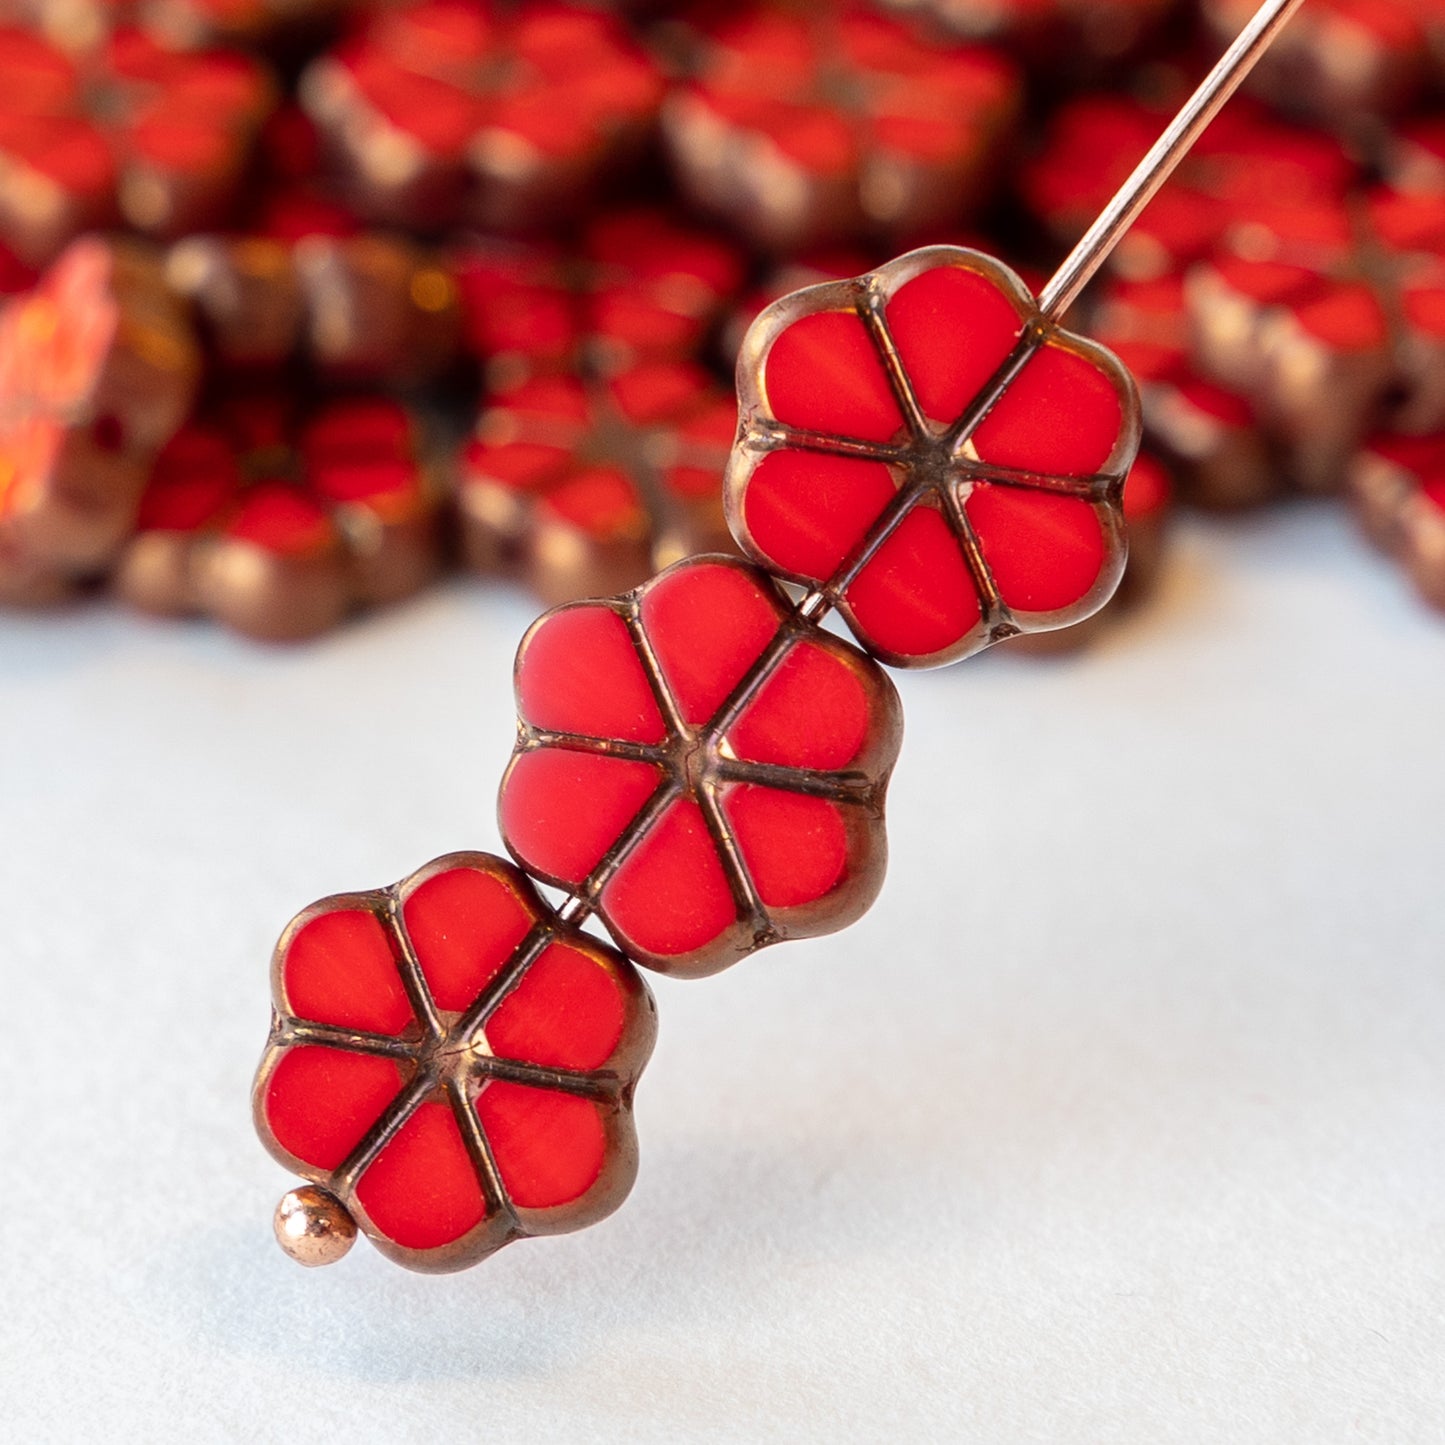 Load image into Gallery viewer, 10mm Forget Me Not Flower Beads - Opaque Red with Bronze Wash - 10 Beads
